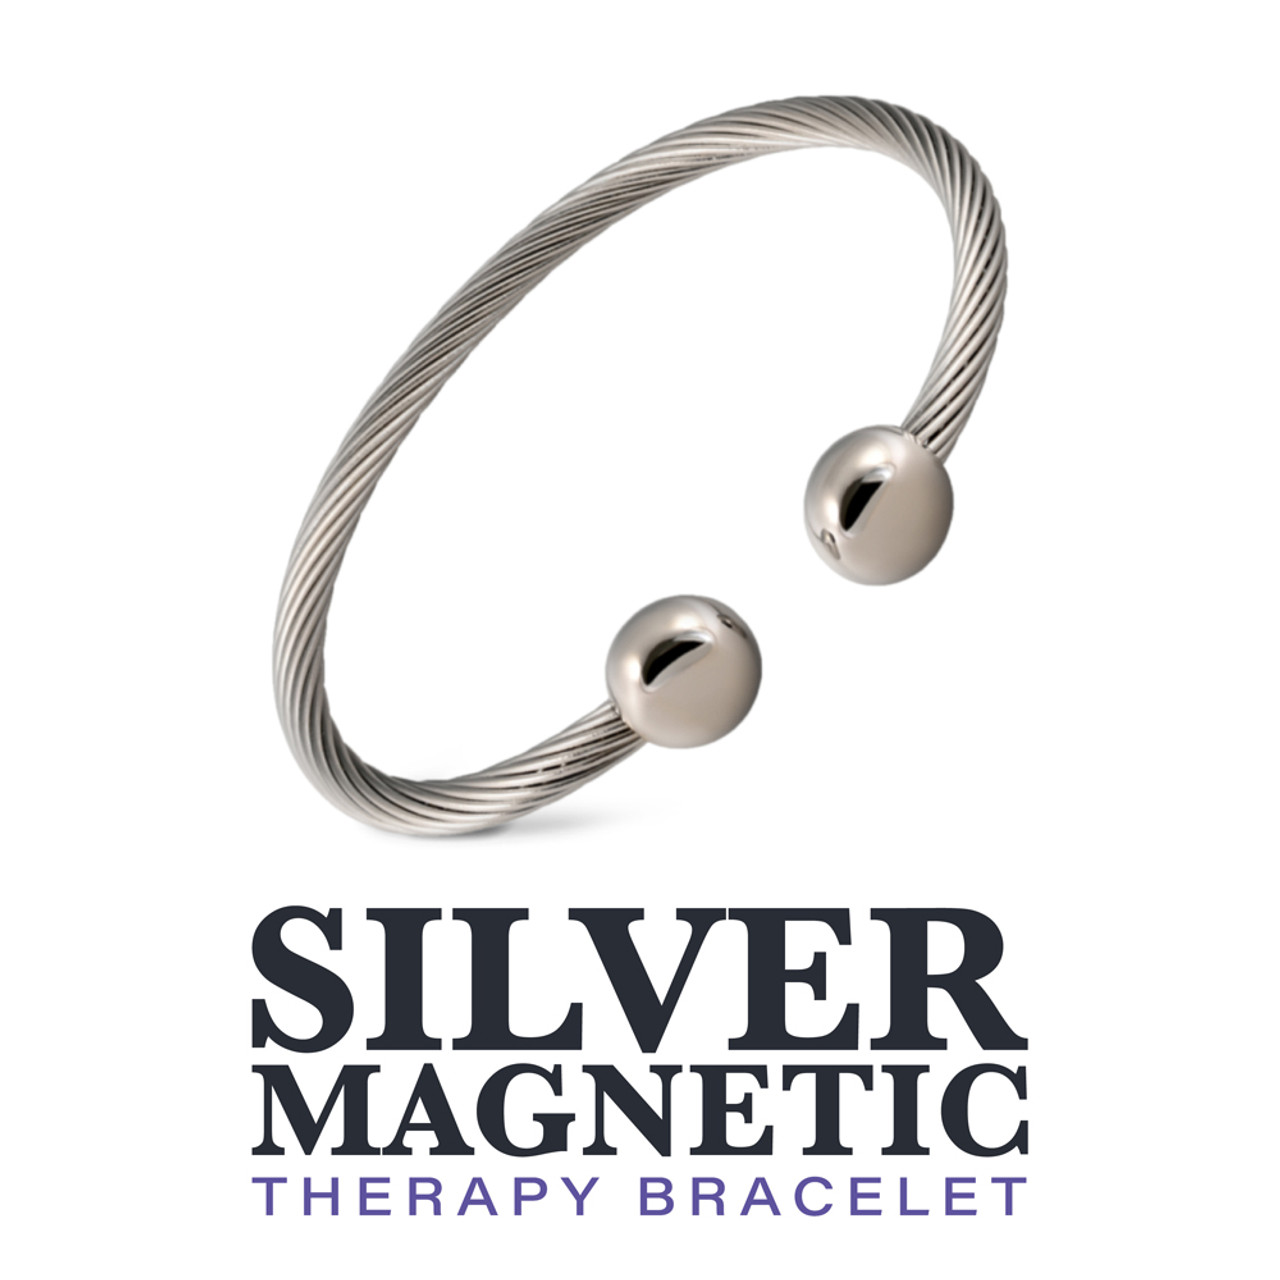 Bracelet with Matt silver magnetic clasp and RC30 cable